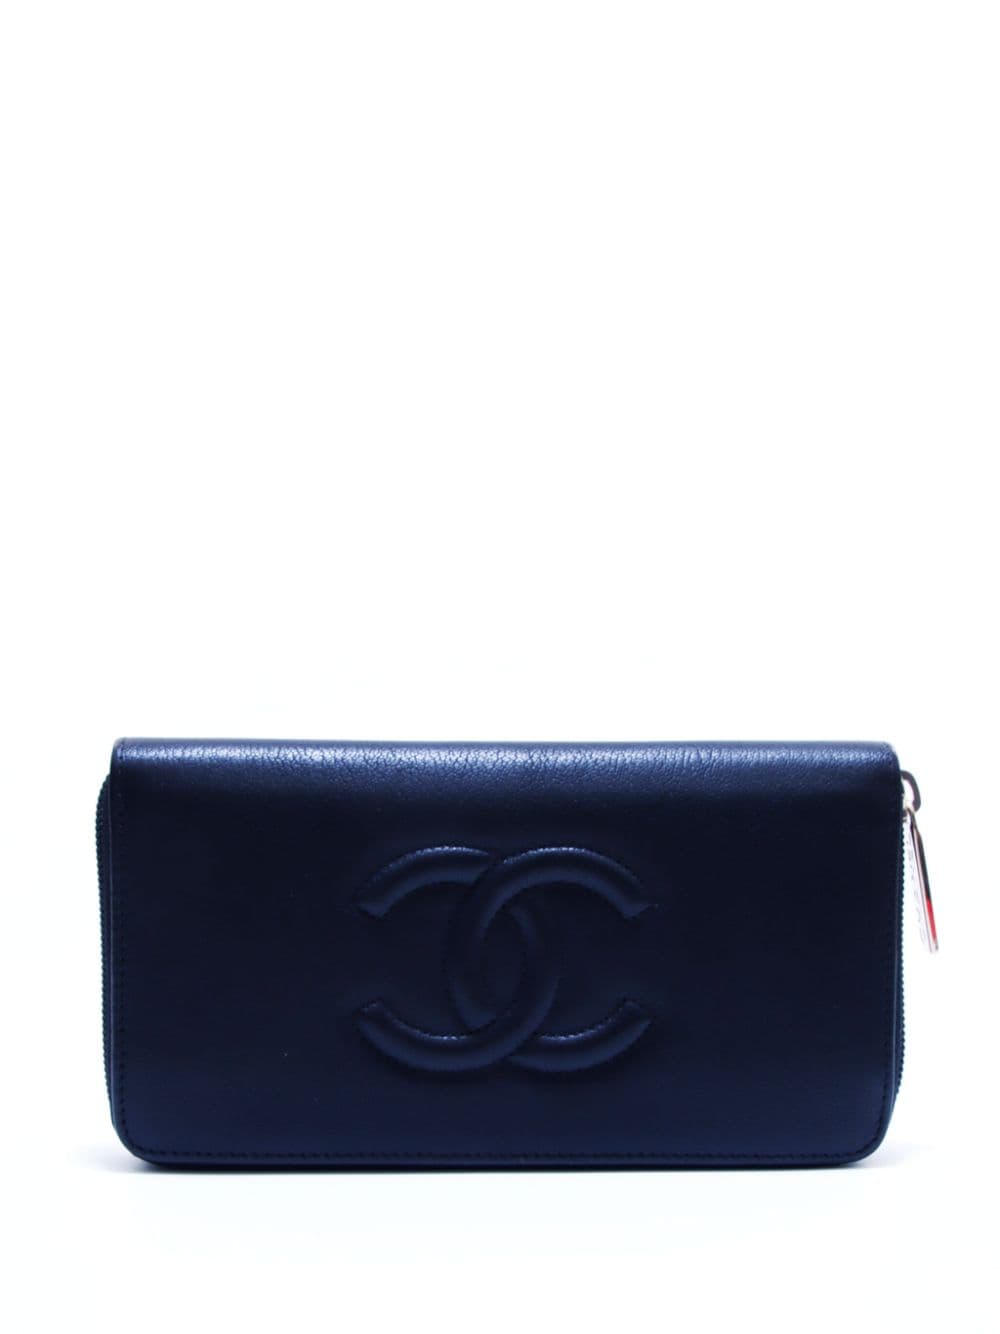 Chanel Red Chevron Leather Mademoiselle Compact Wallet For Sale at